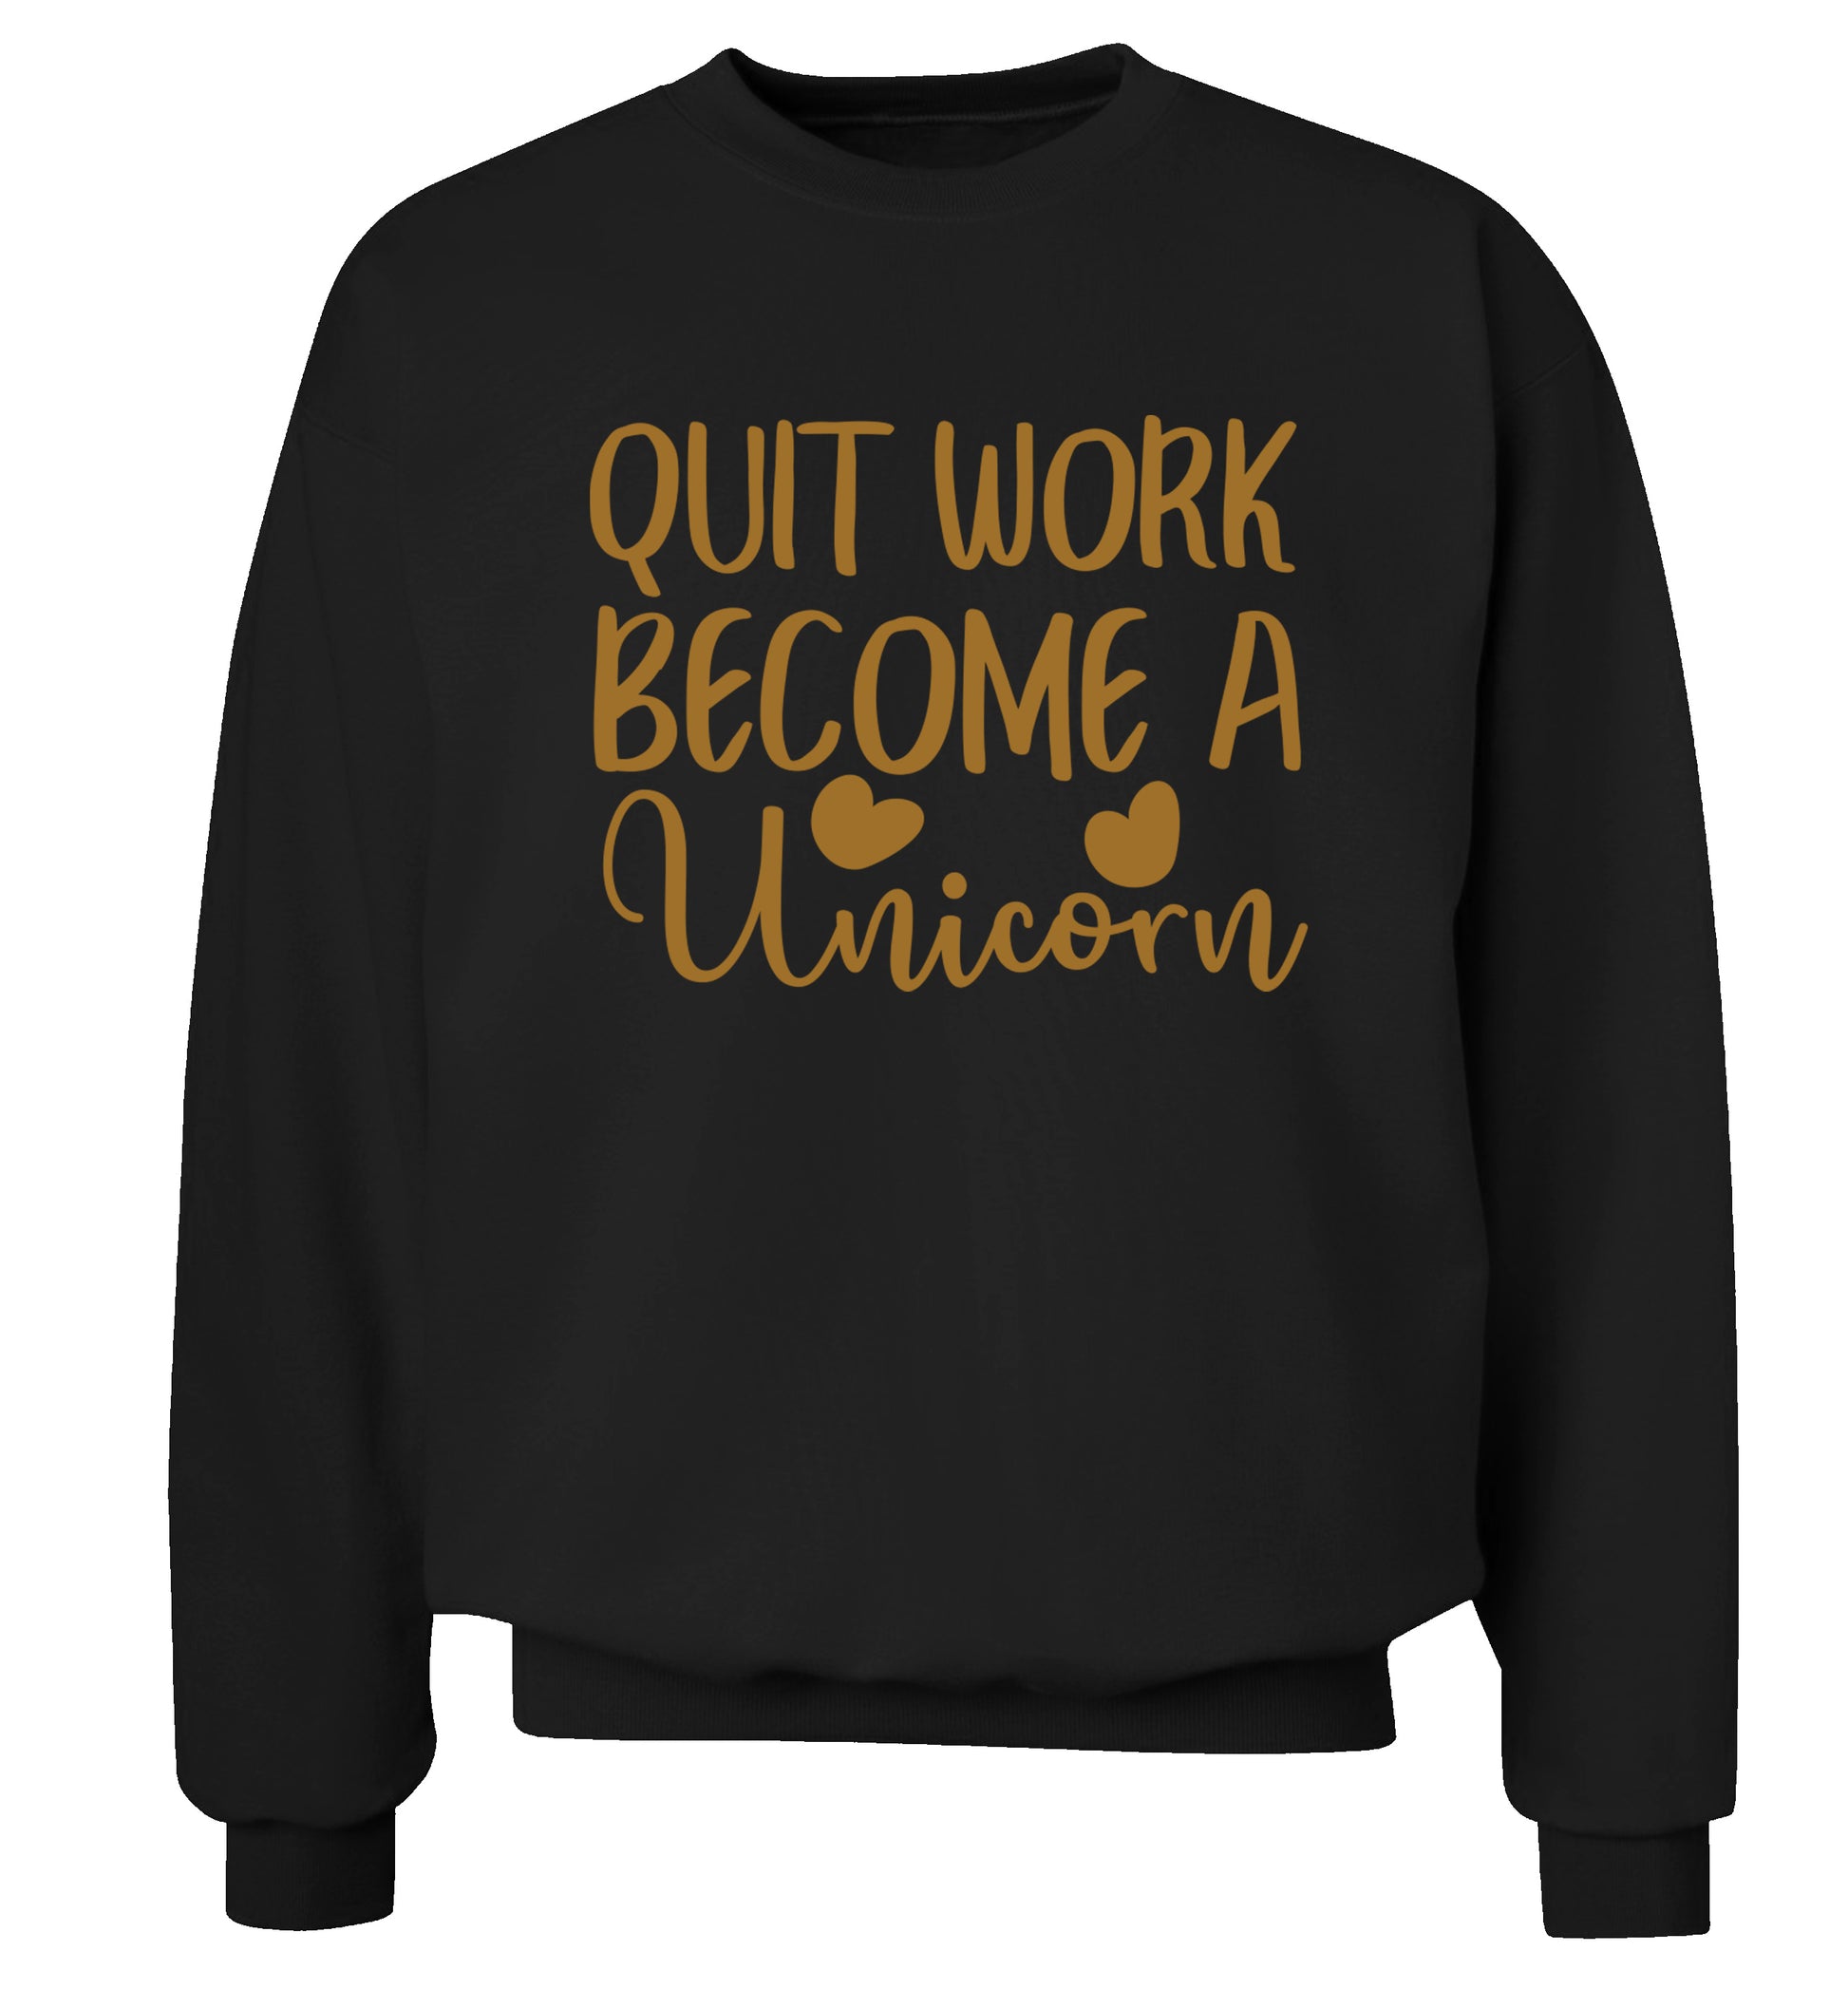 Quit work become a unicorn Adult's unisex black Sweater 2XL